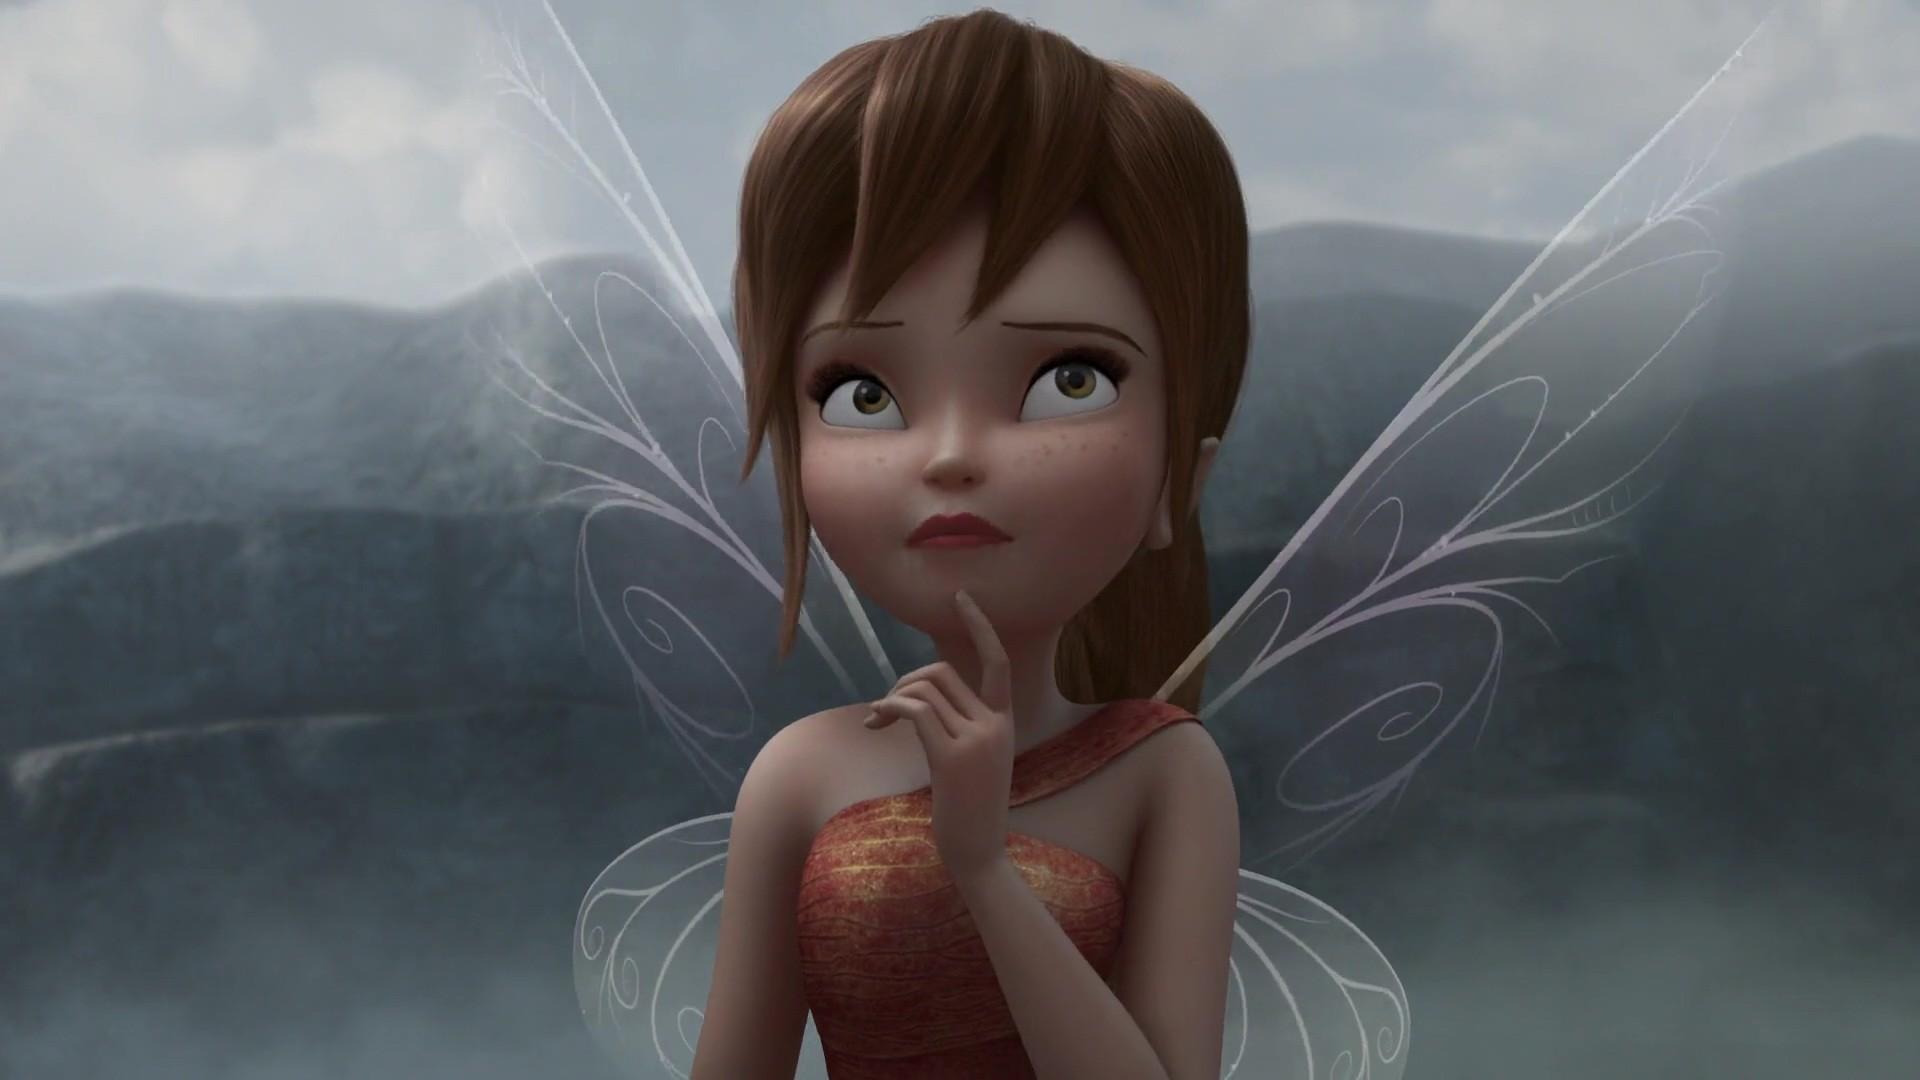 HD wallpaper, Movies, Tinkerbell, Animated Movies